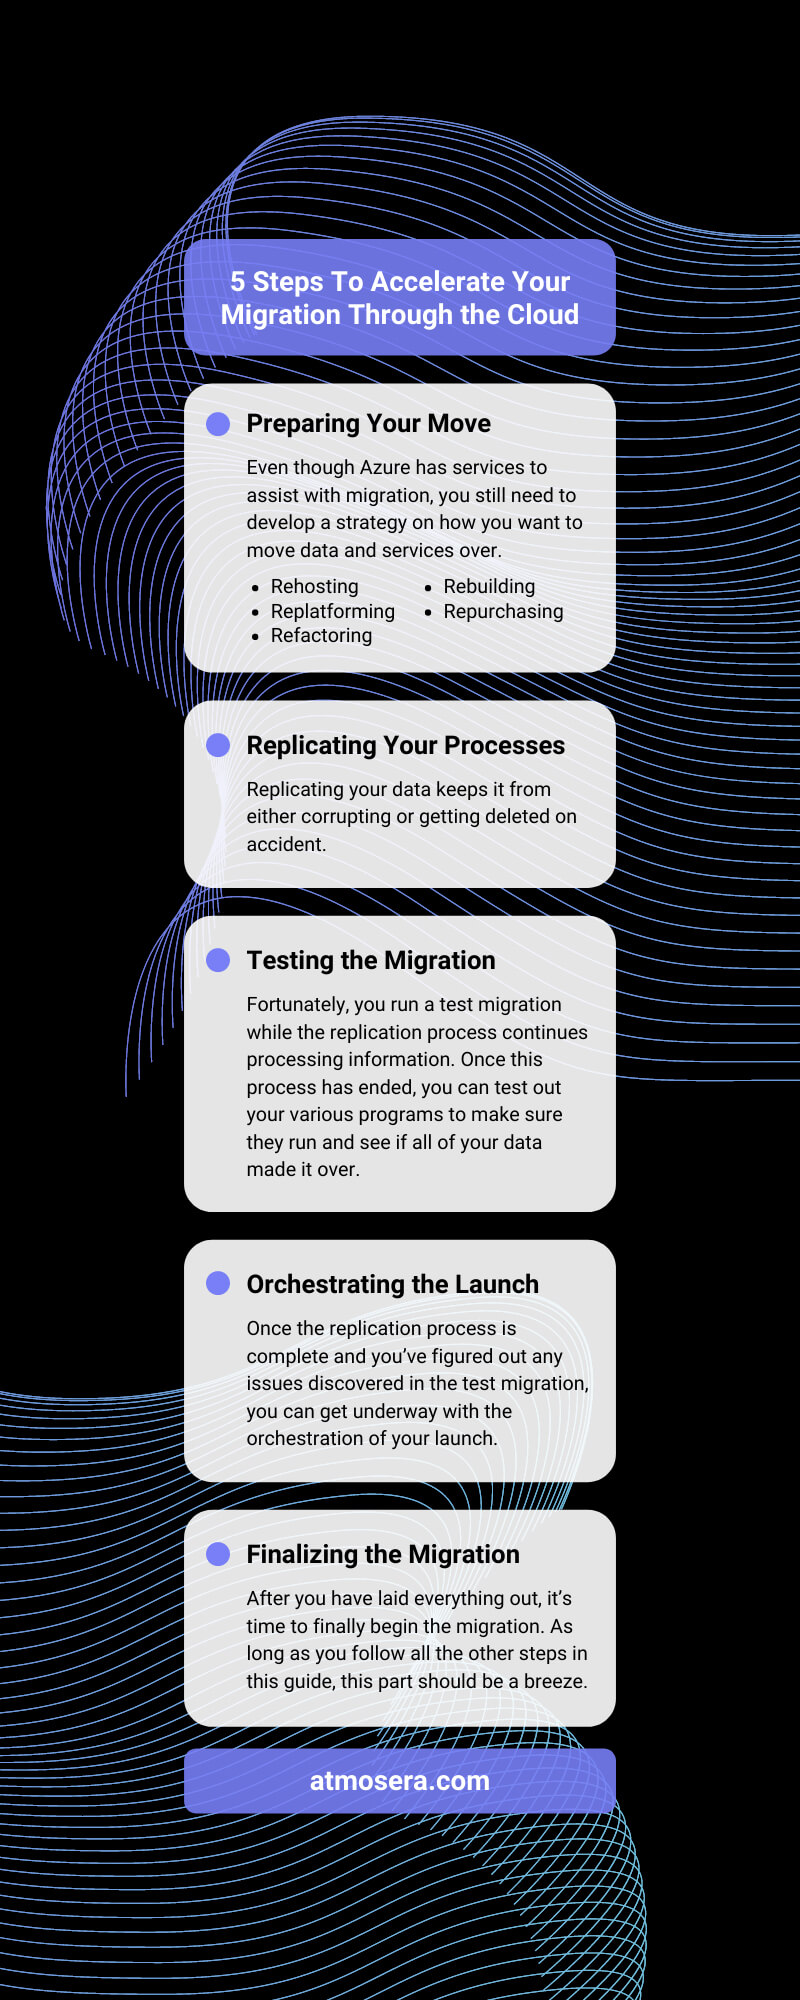 5 Steps To Accelerate Your Migration Through the Cloud